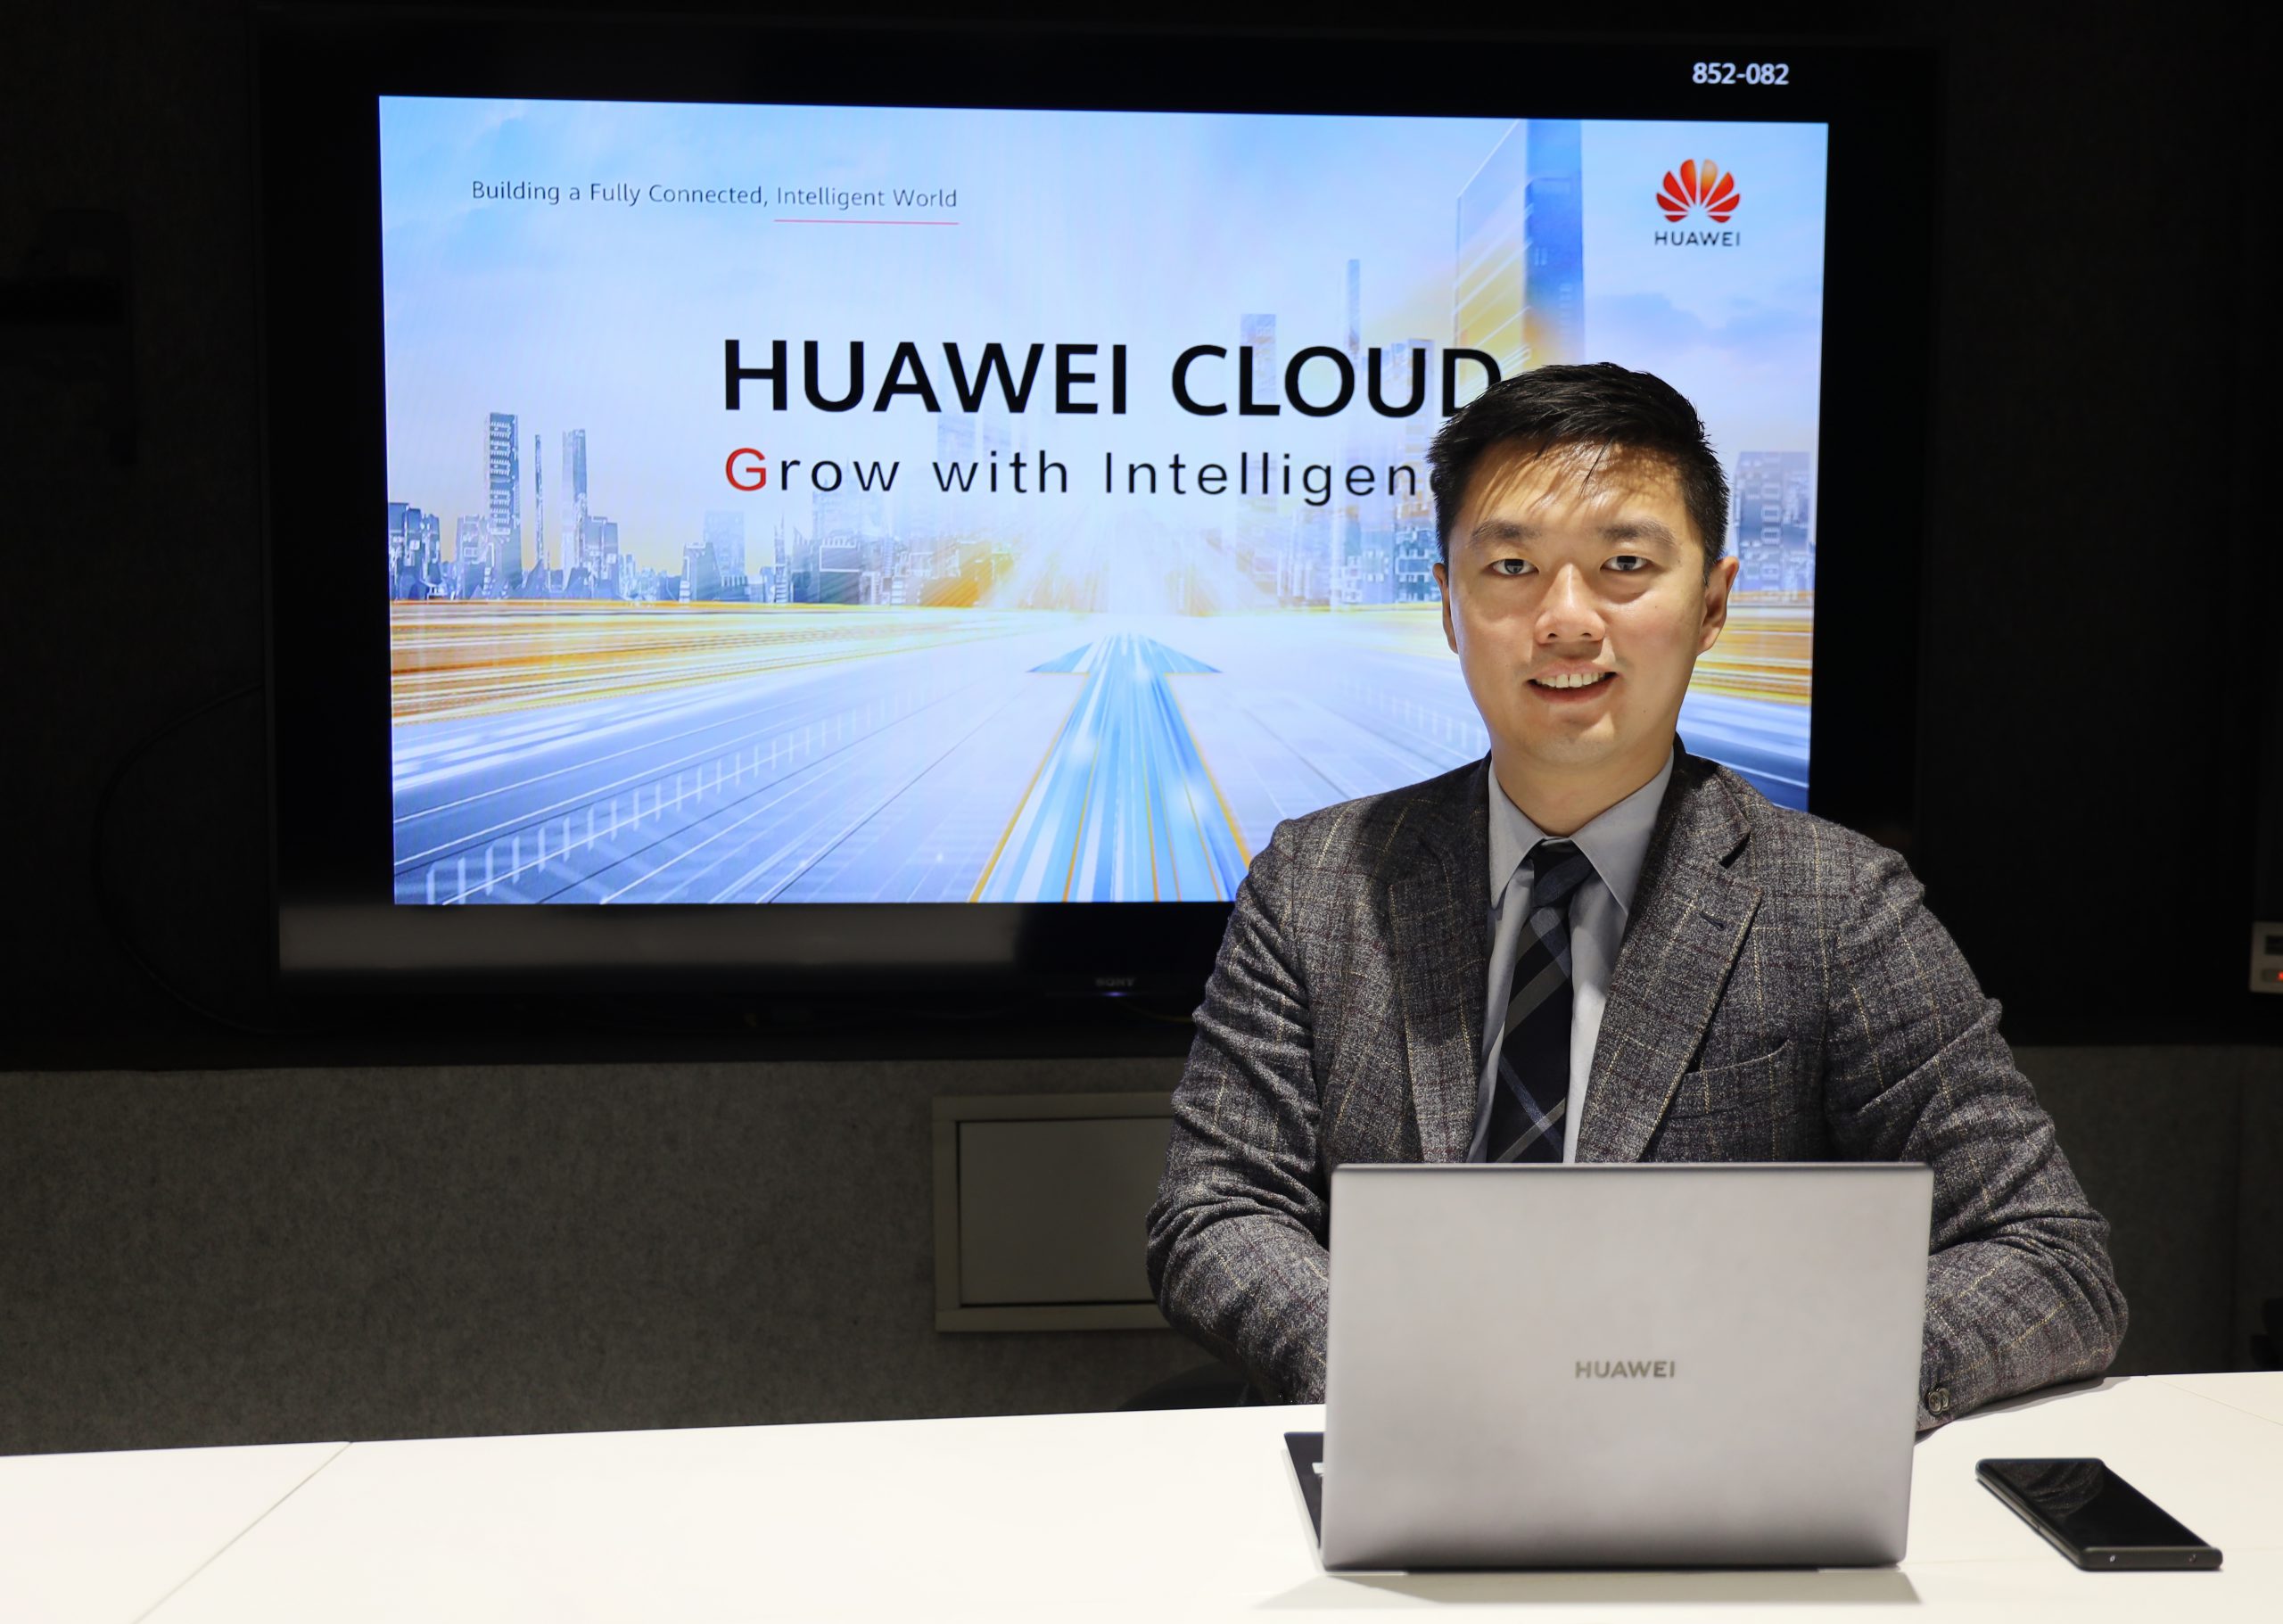 Ivan Mo, Public Relations Director for Huawei and Head of Huawei Cloud in Nepal